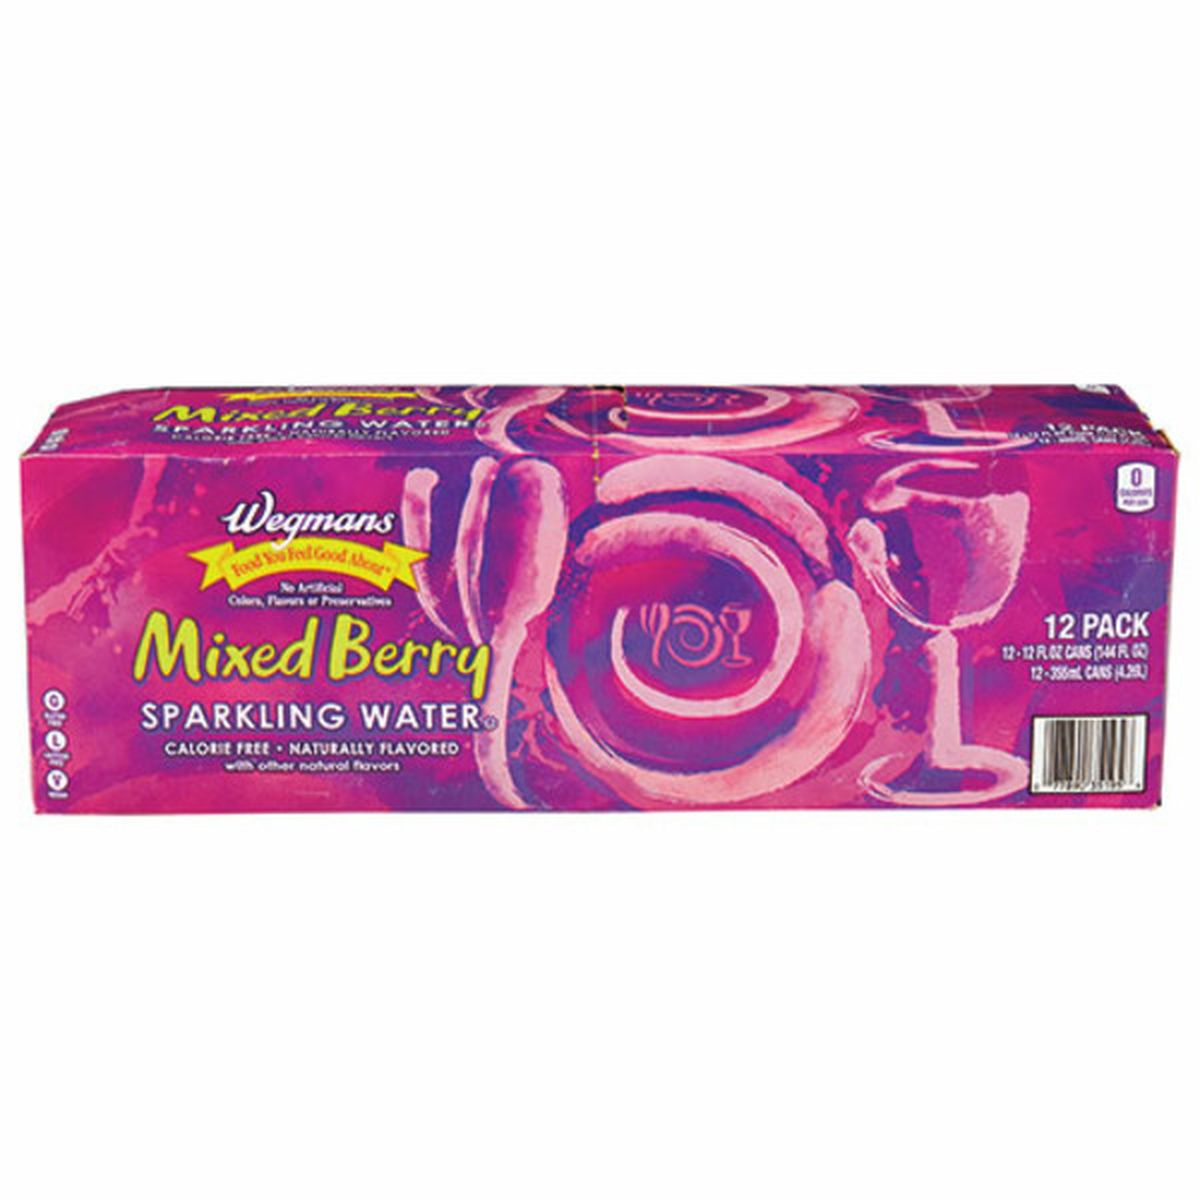 Calories in Wegmans Sparkling Water Mixed Berry, 12 Pack